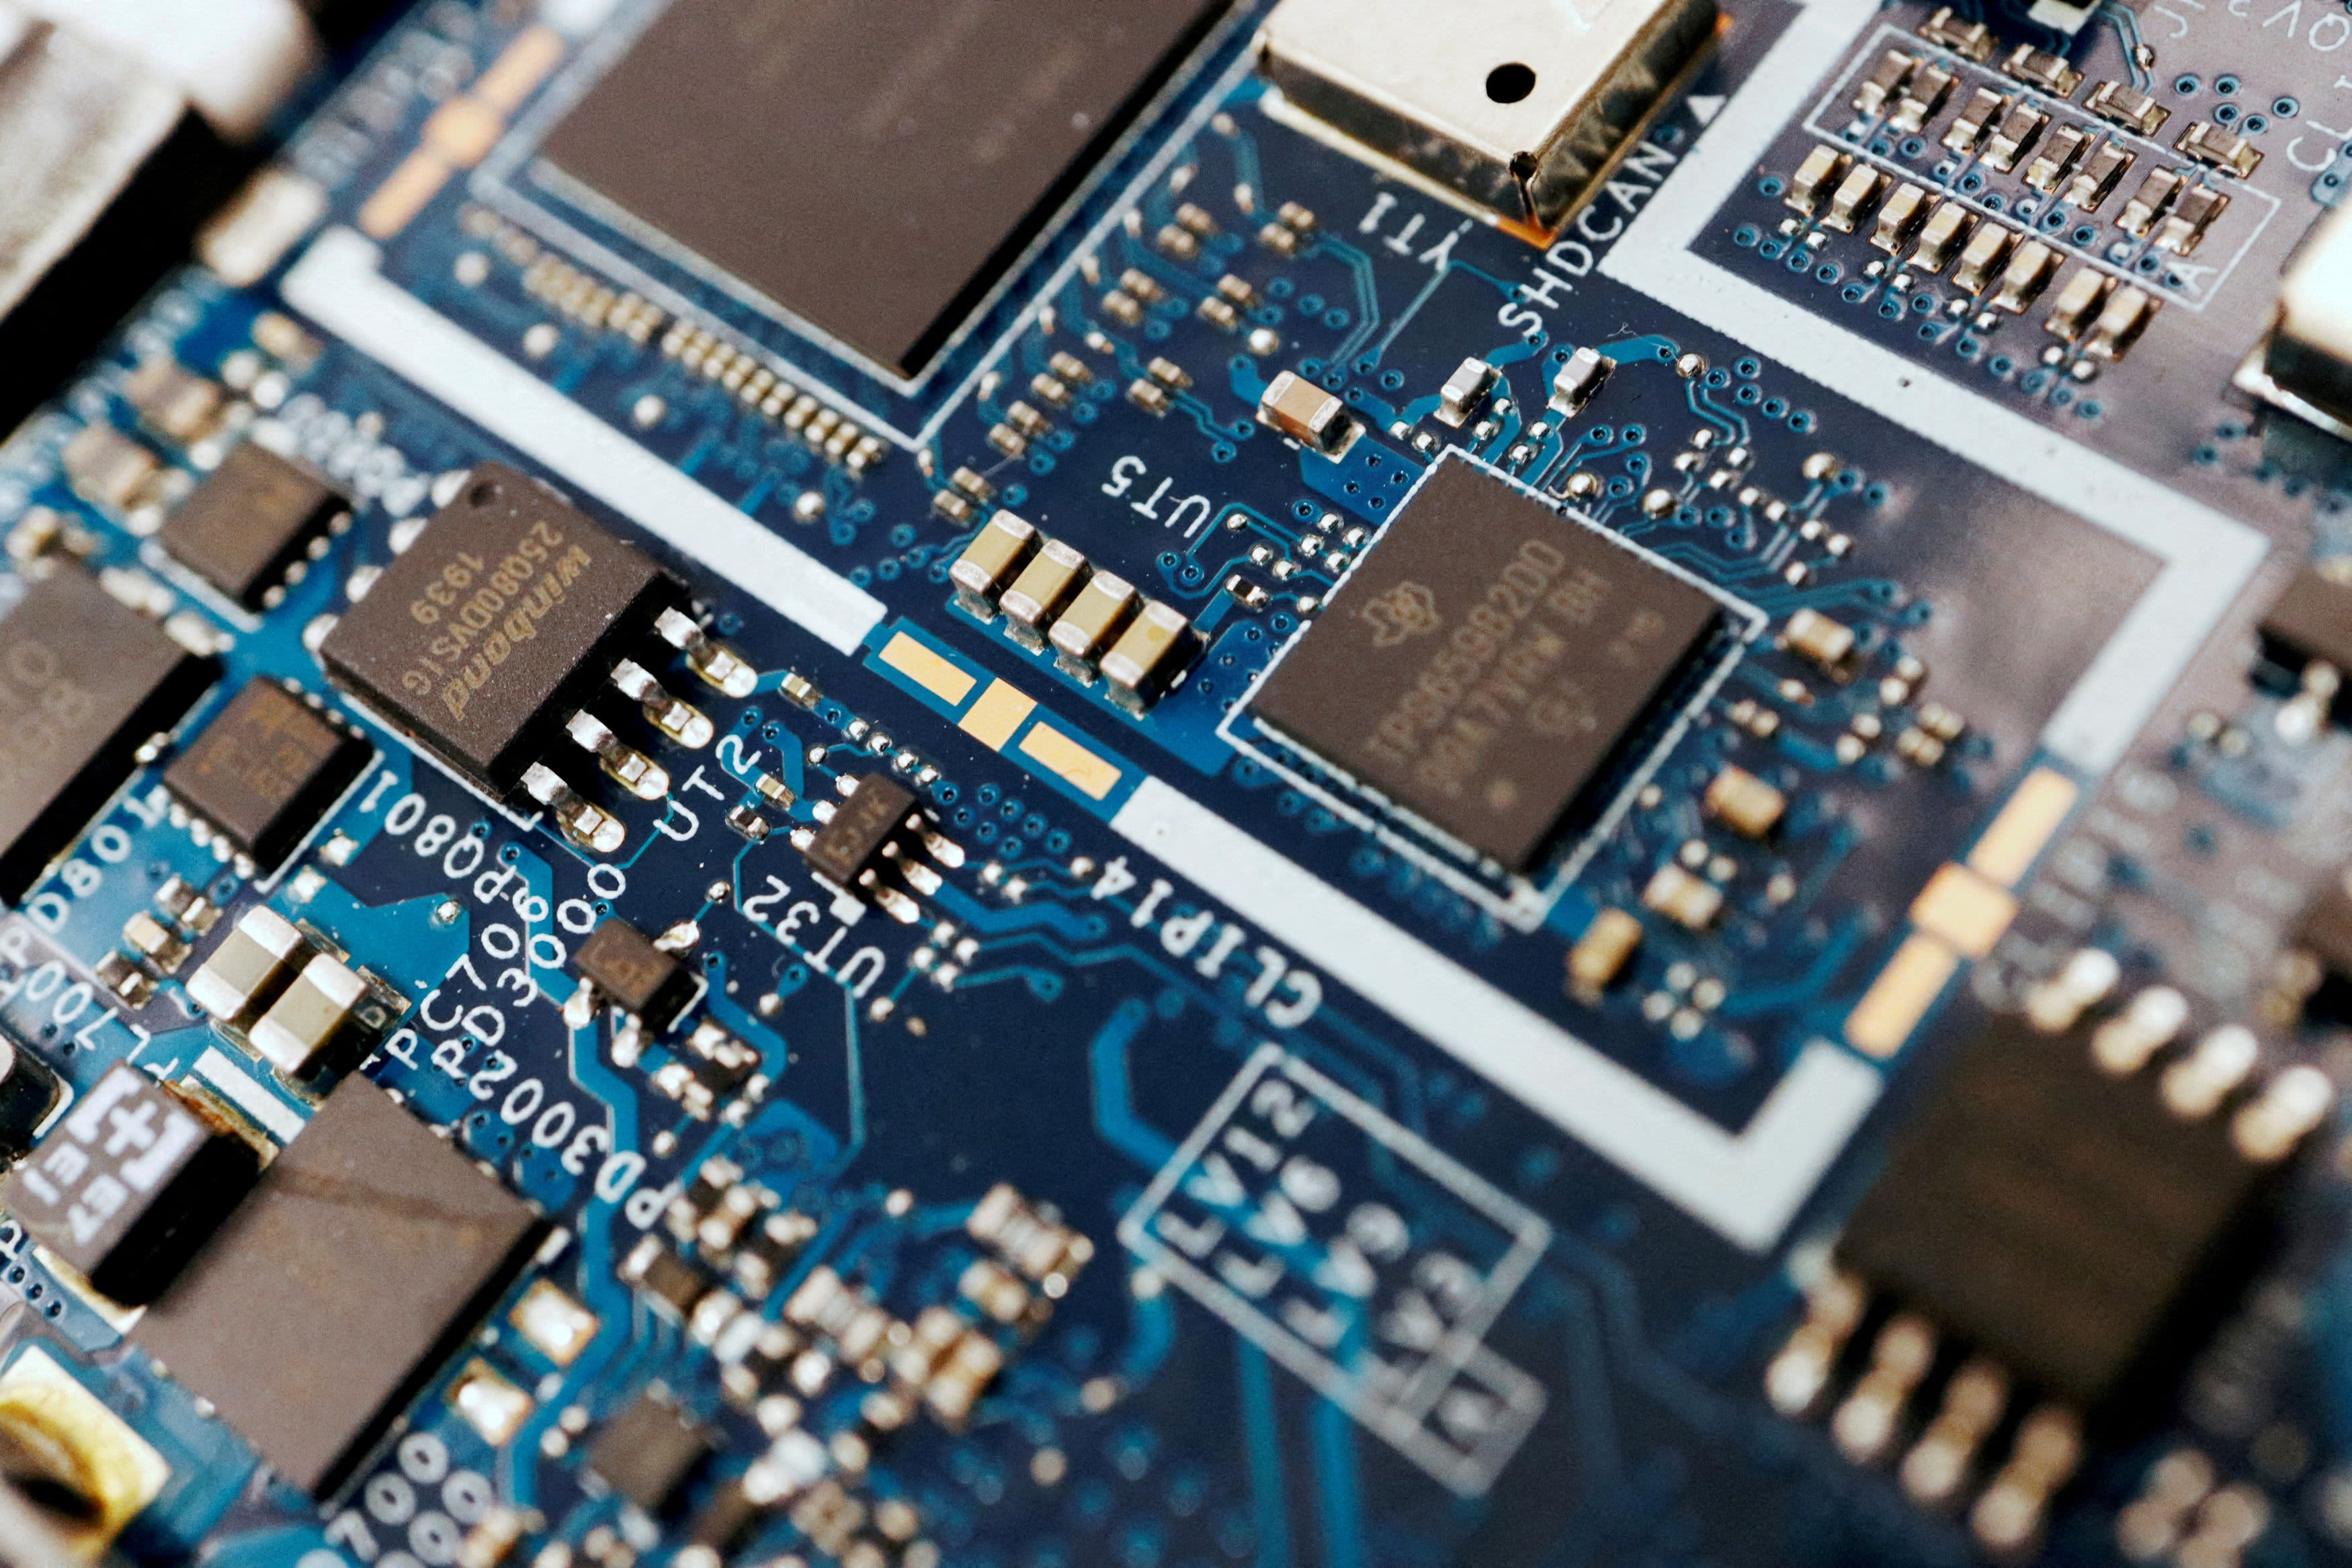 Samsung and ASML intend to build an advanced chip factory in South Korea